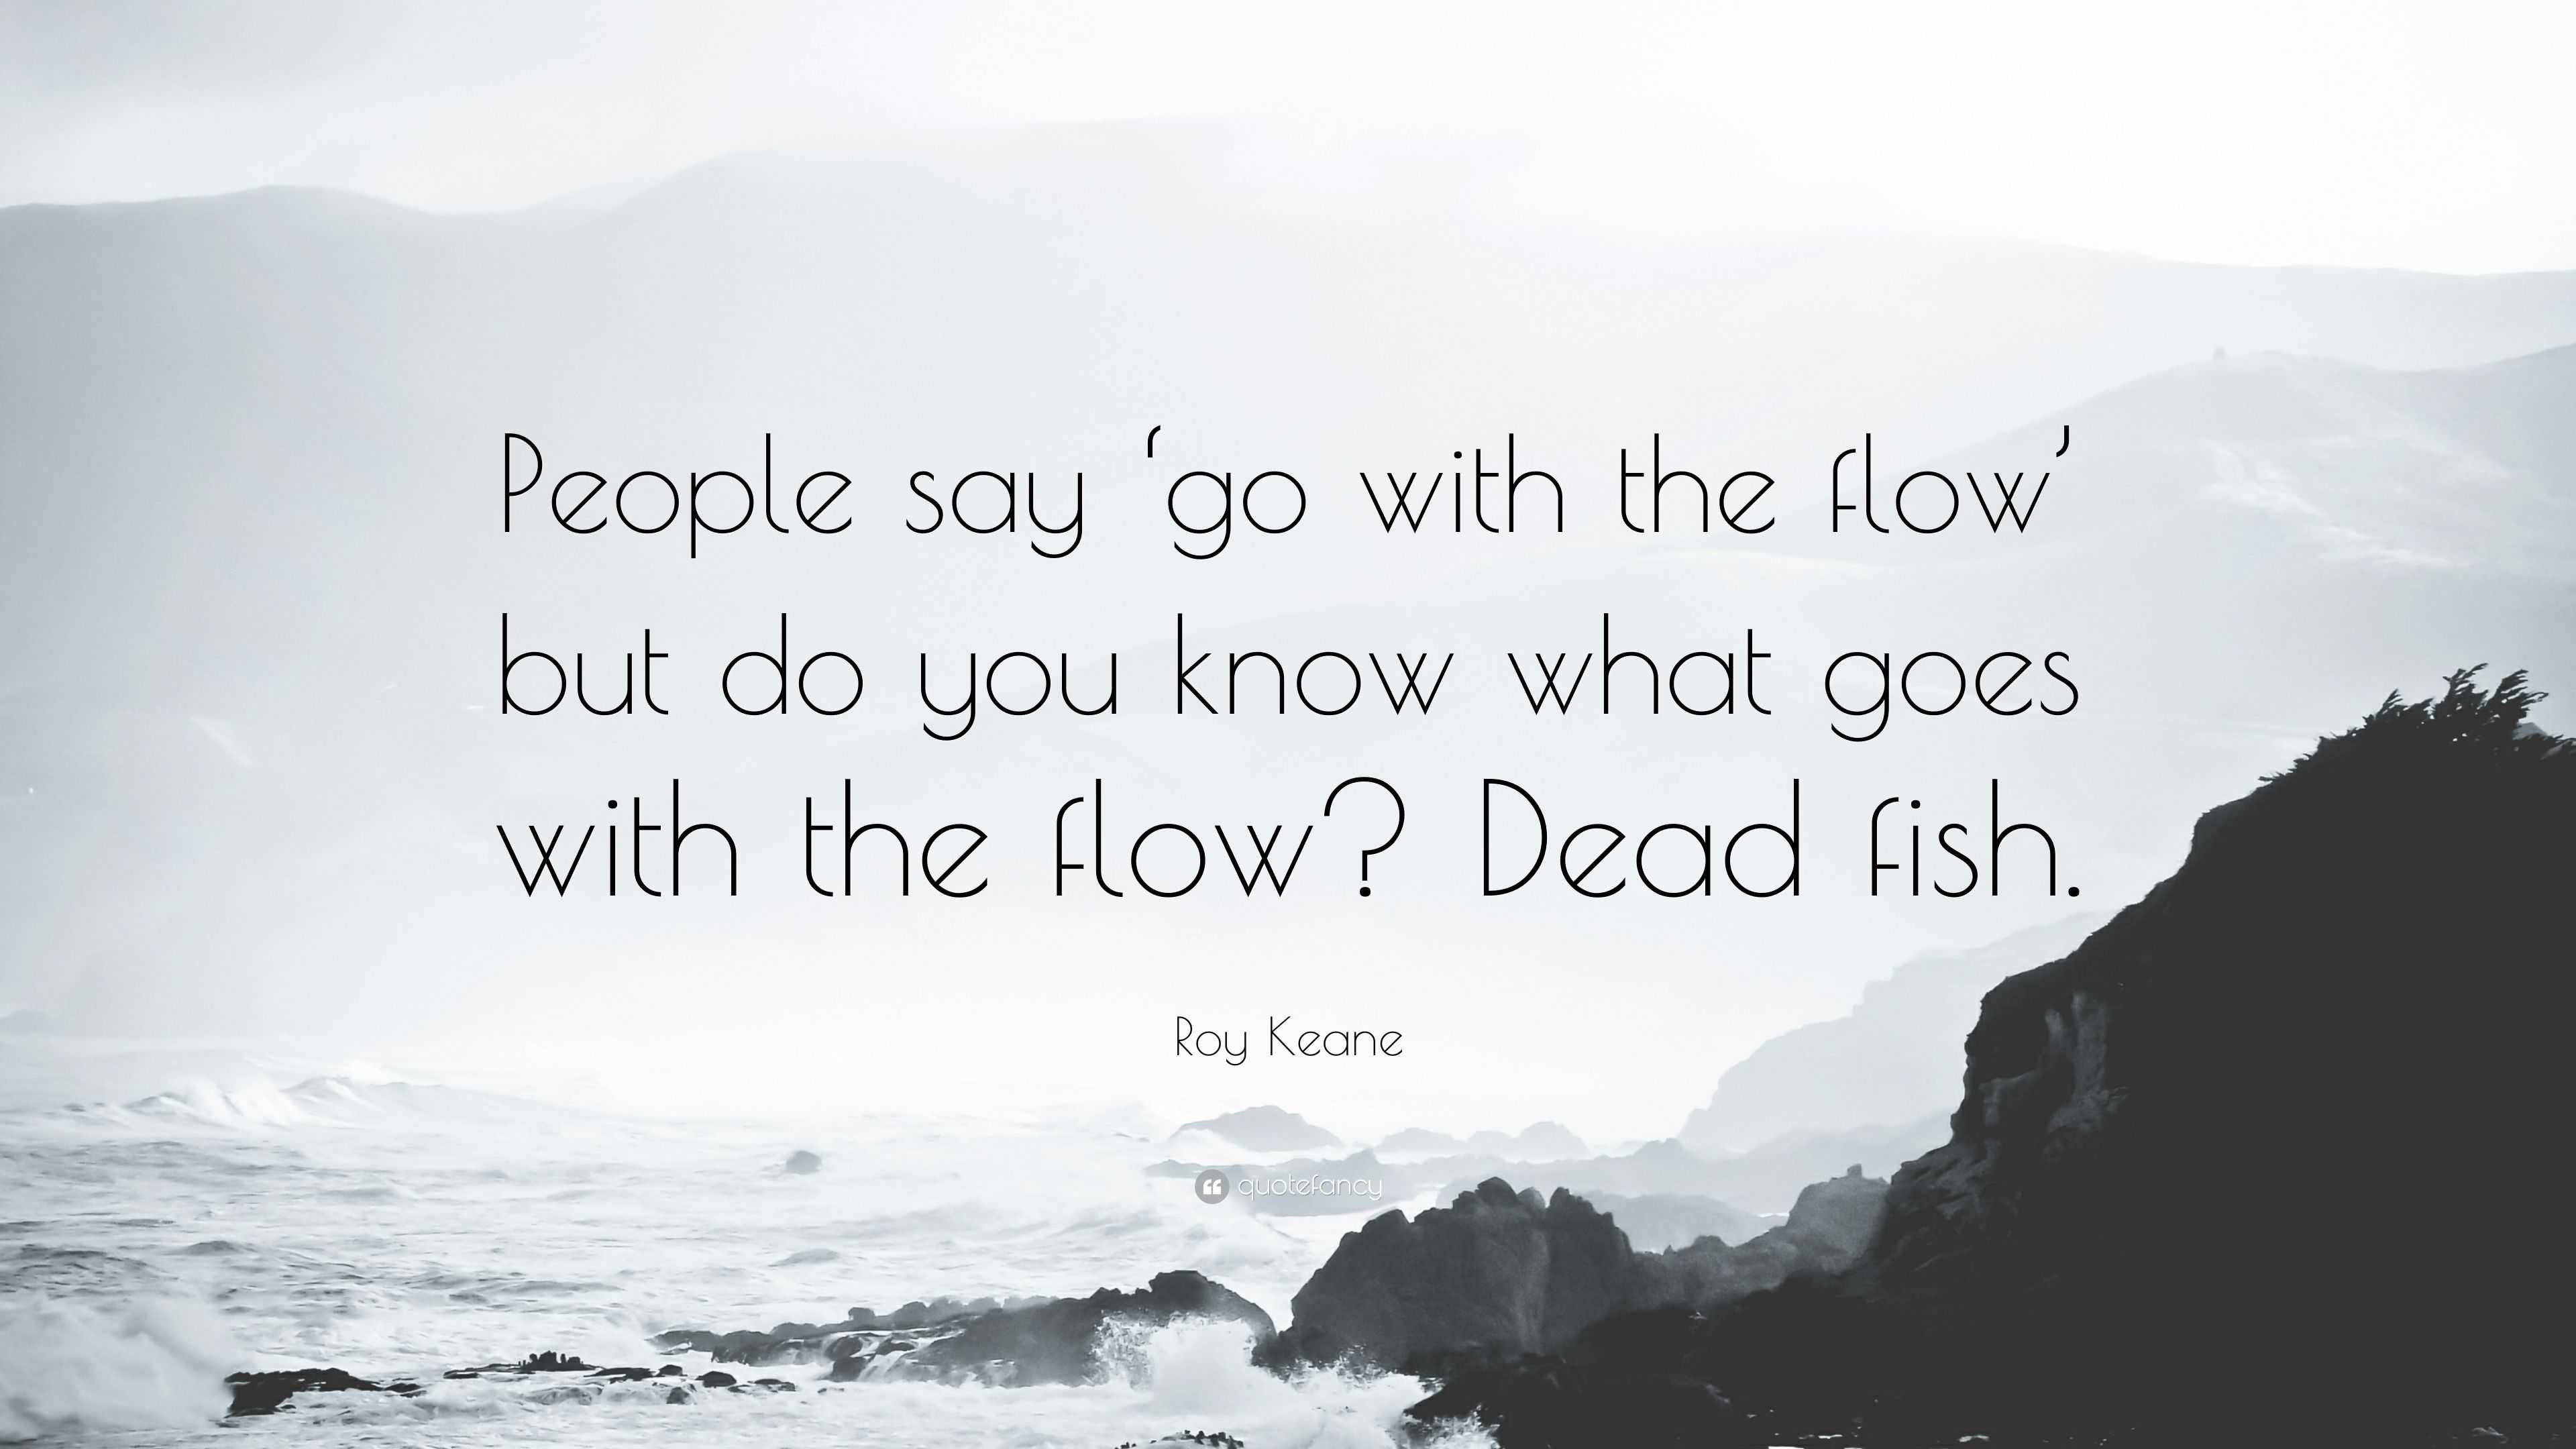 Roy Keane Quote: “People say 'go with the flow' but do you know what goes  with